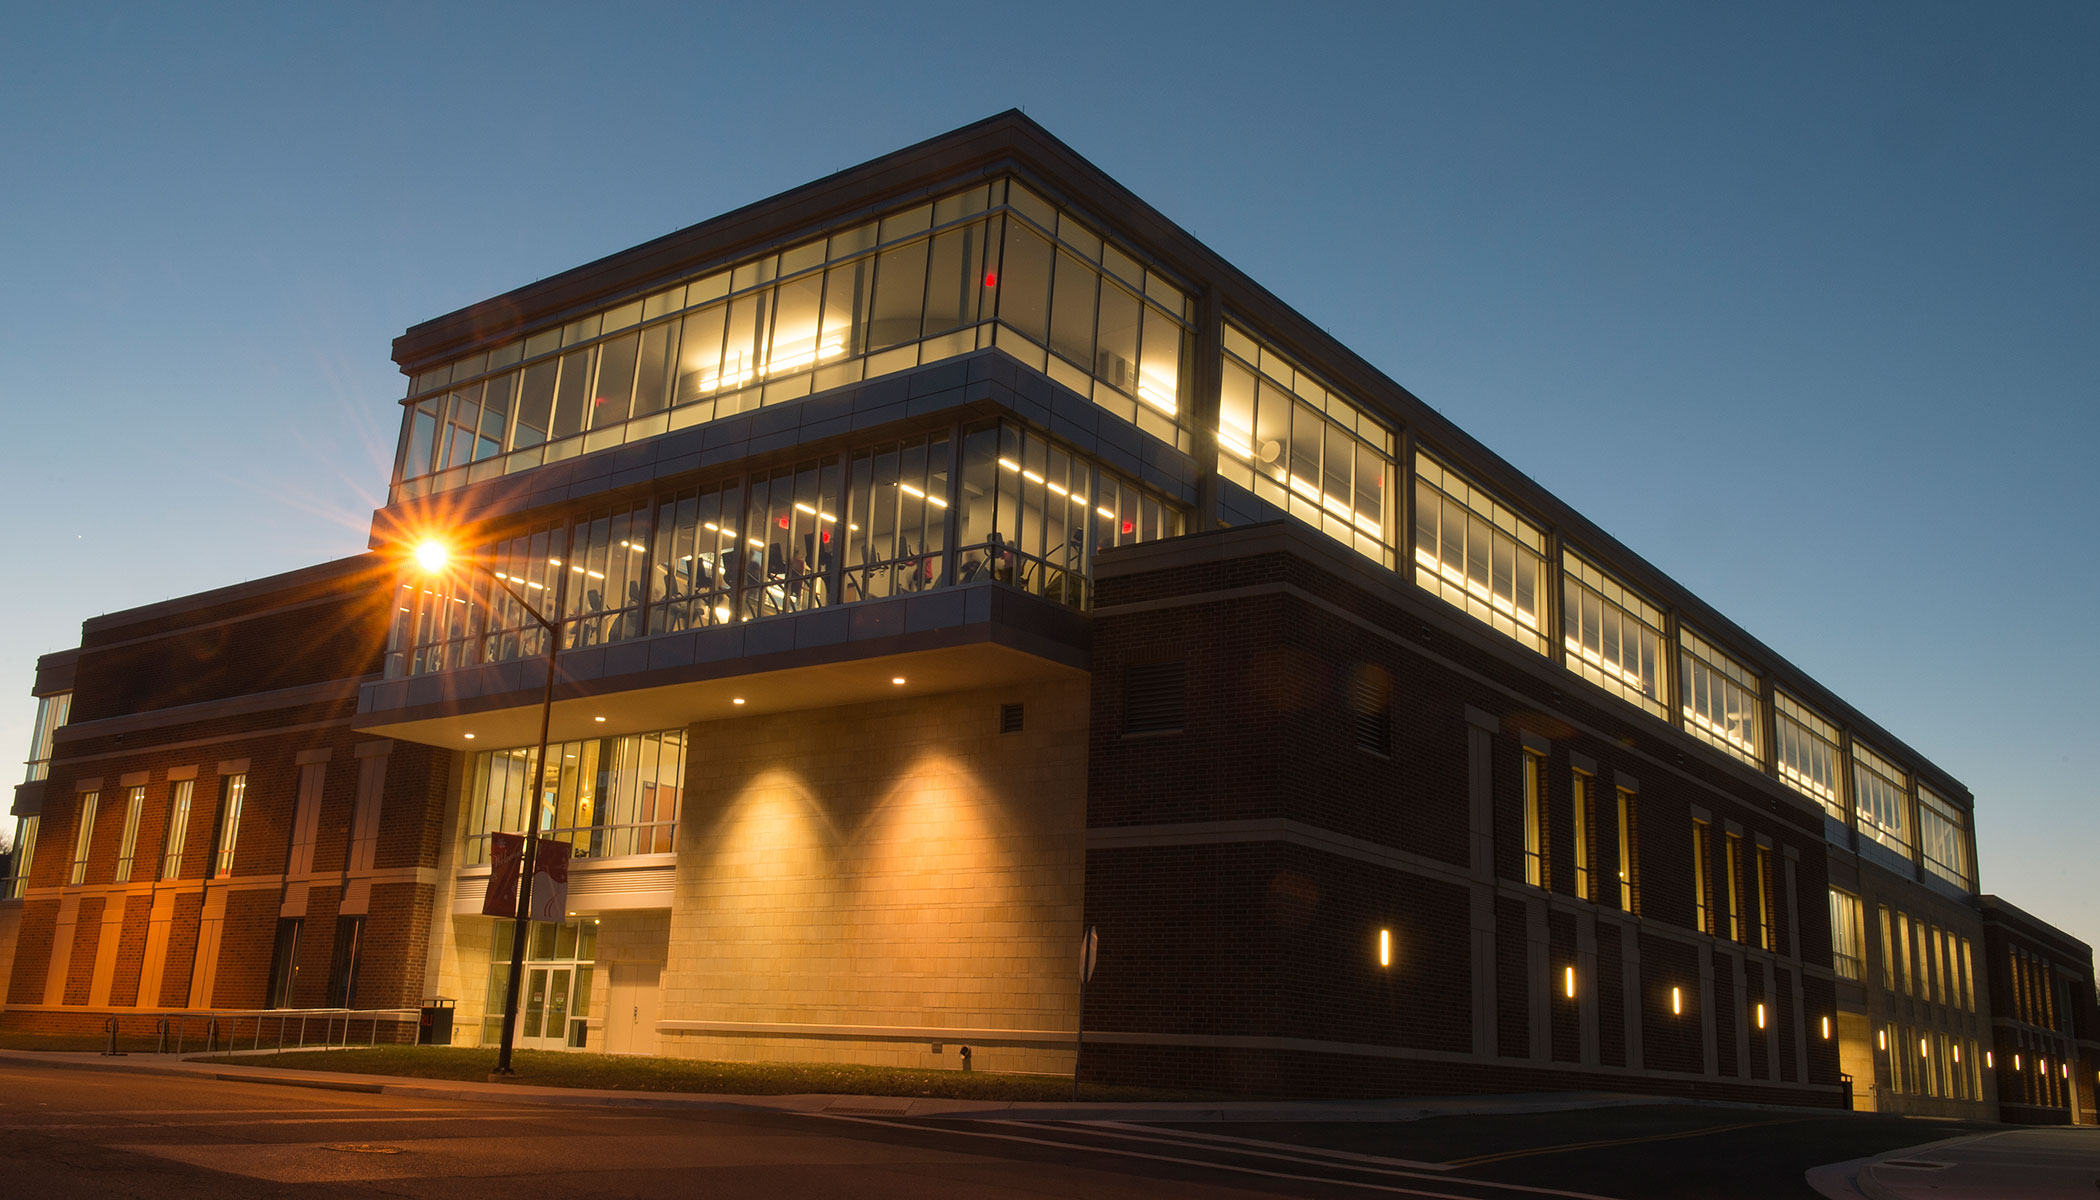 photo of the Student Recreation and Wellness Center from the street at night.